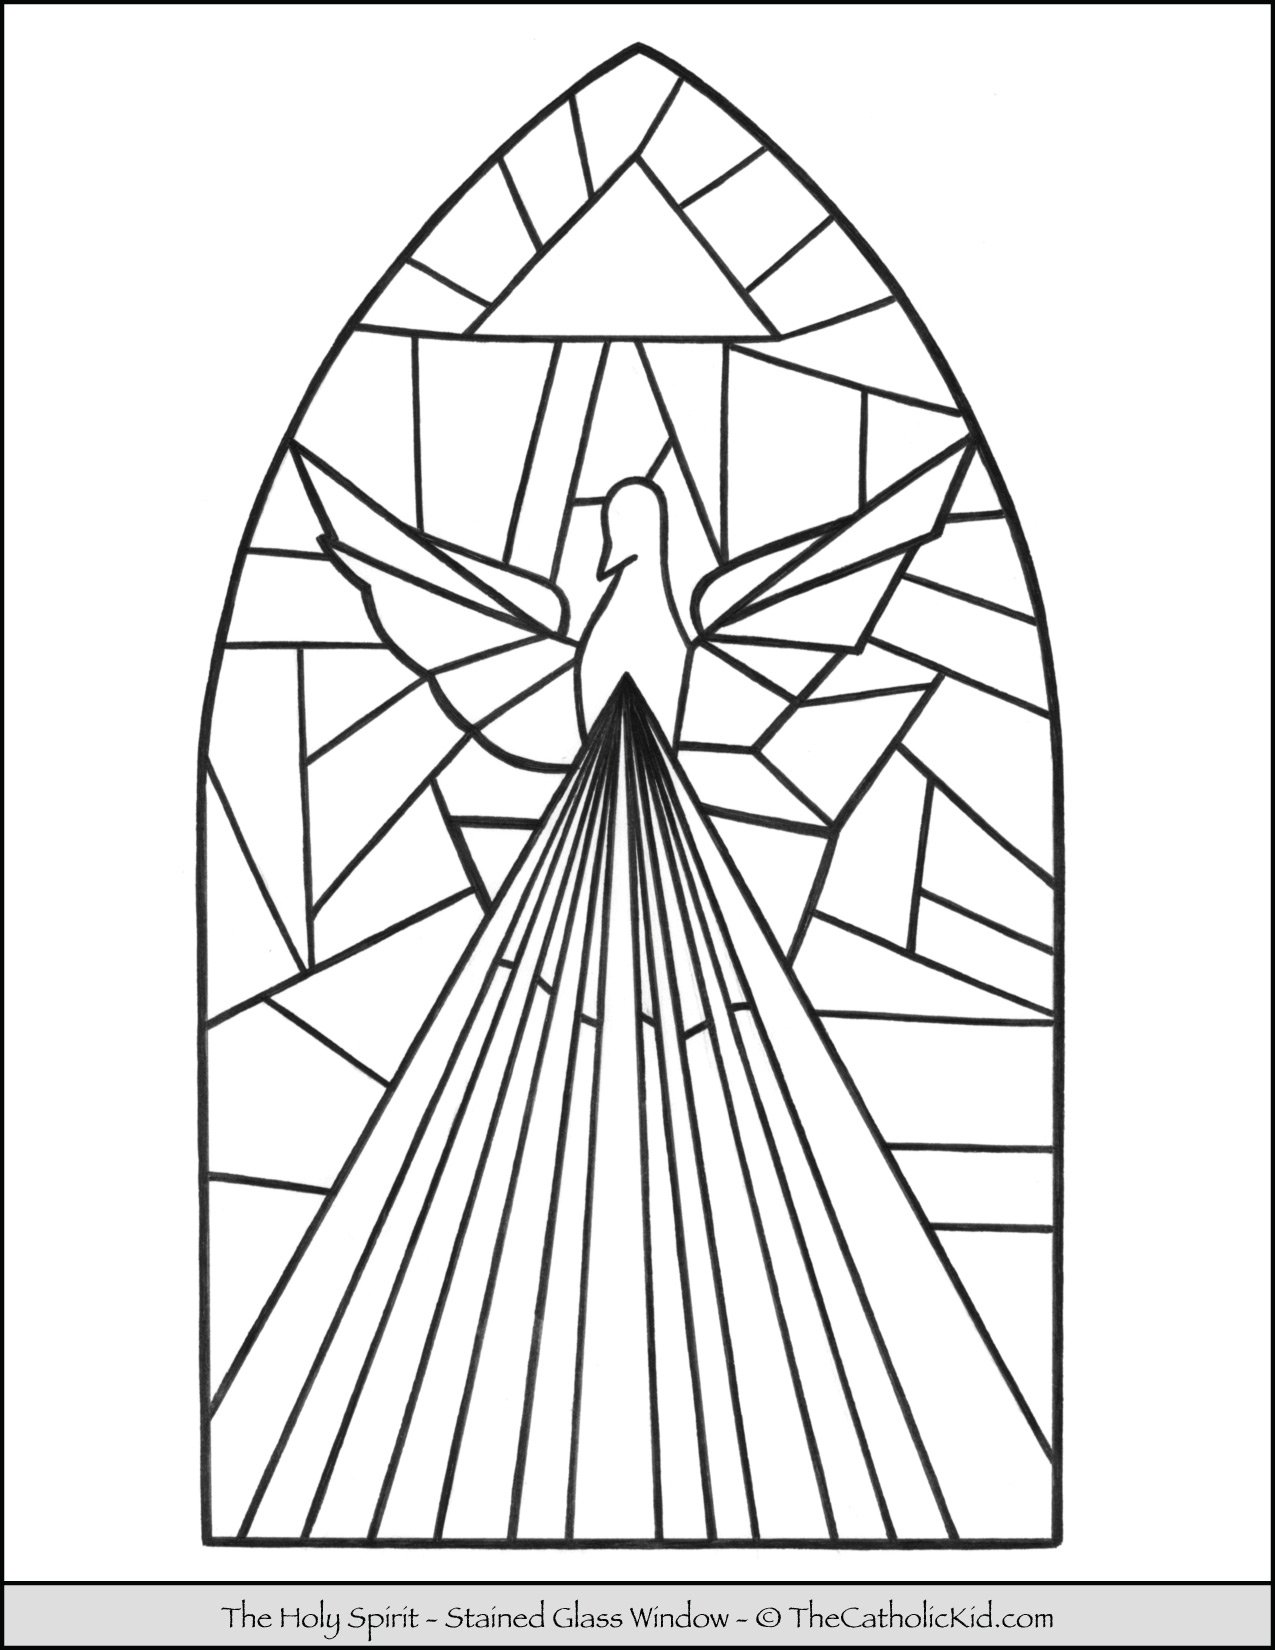 Sacrament of Confirmation Coloring Pages Download Pack - TheCatholicKid.com